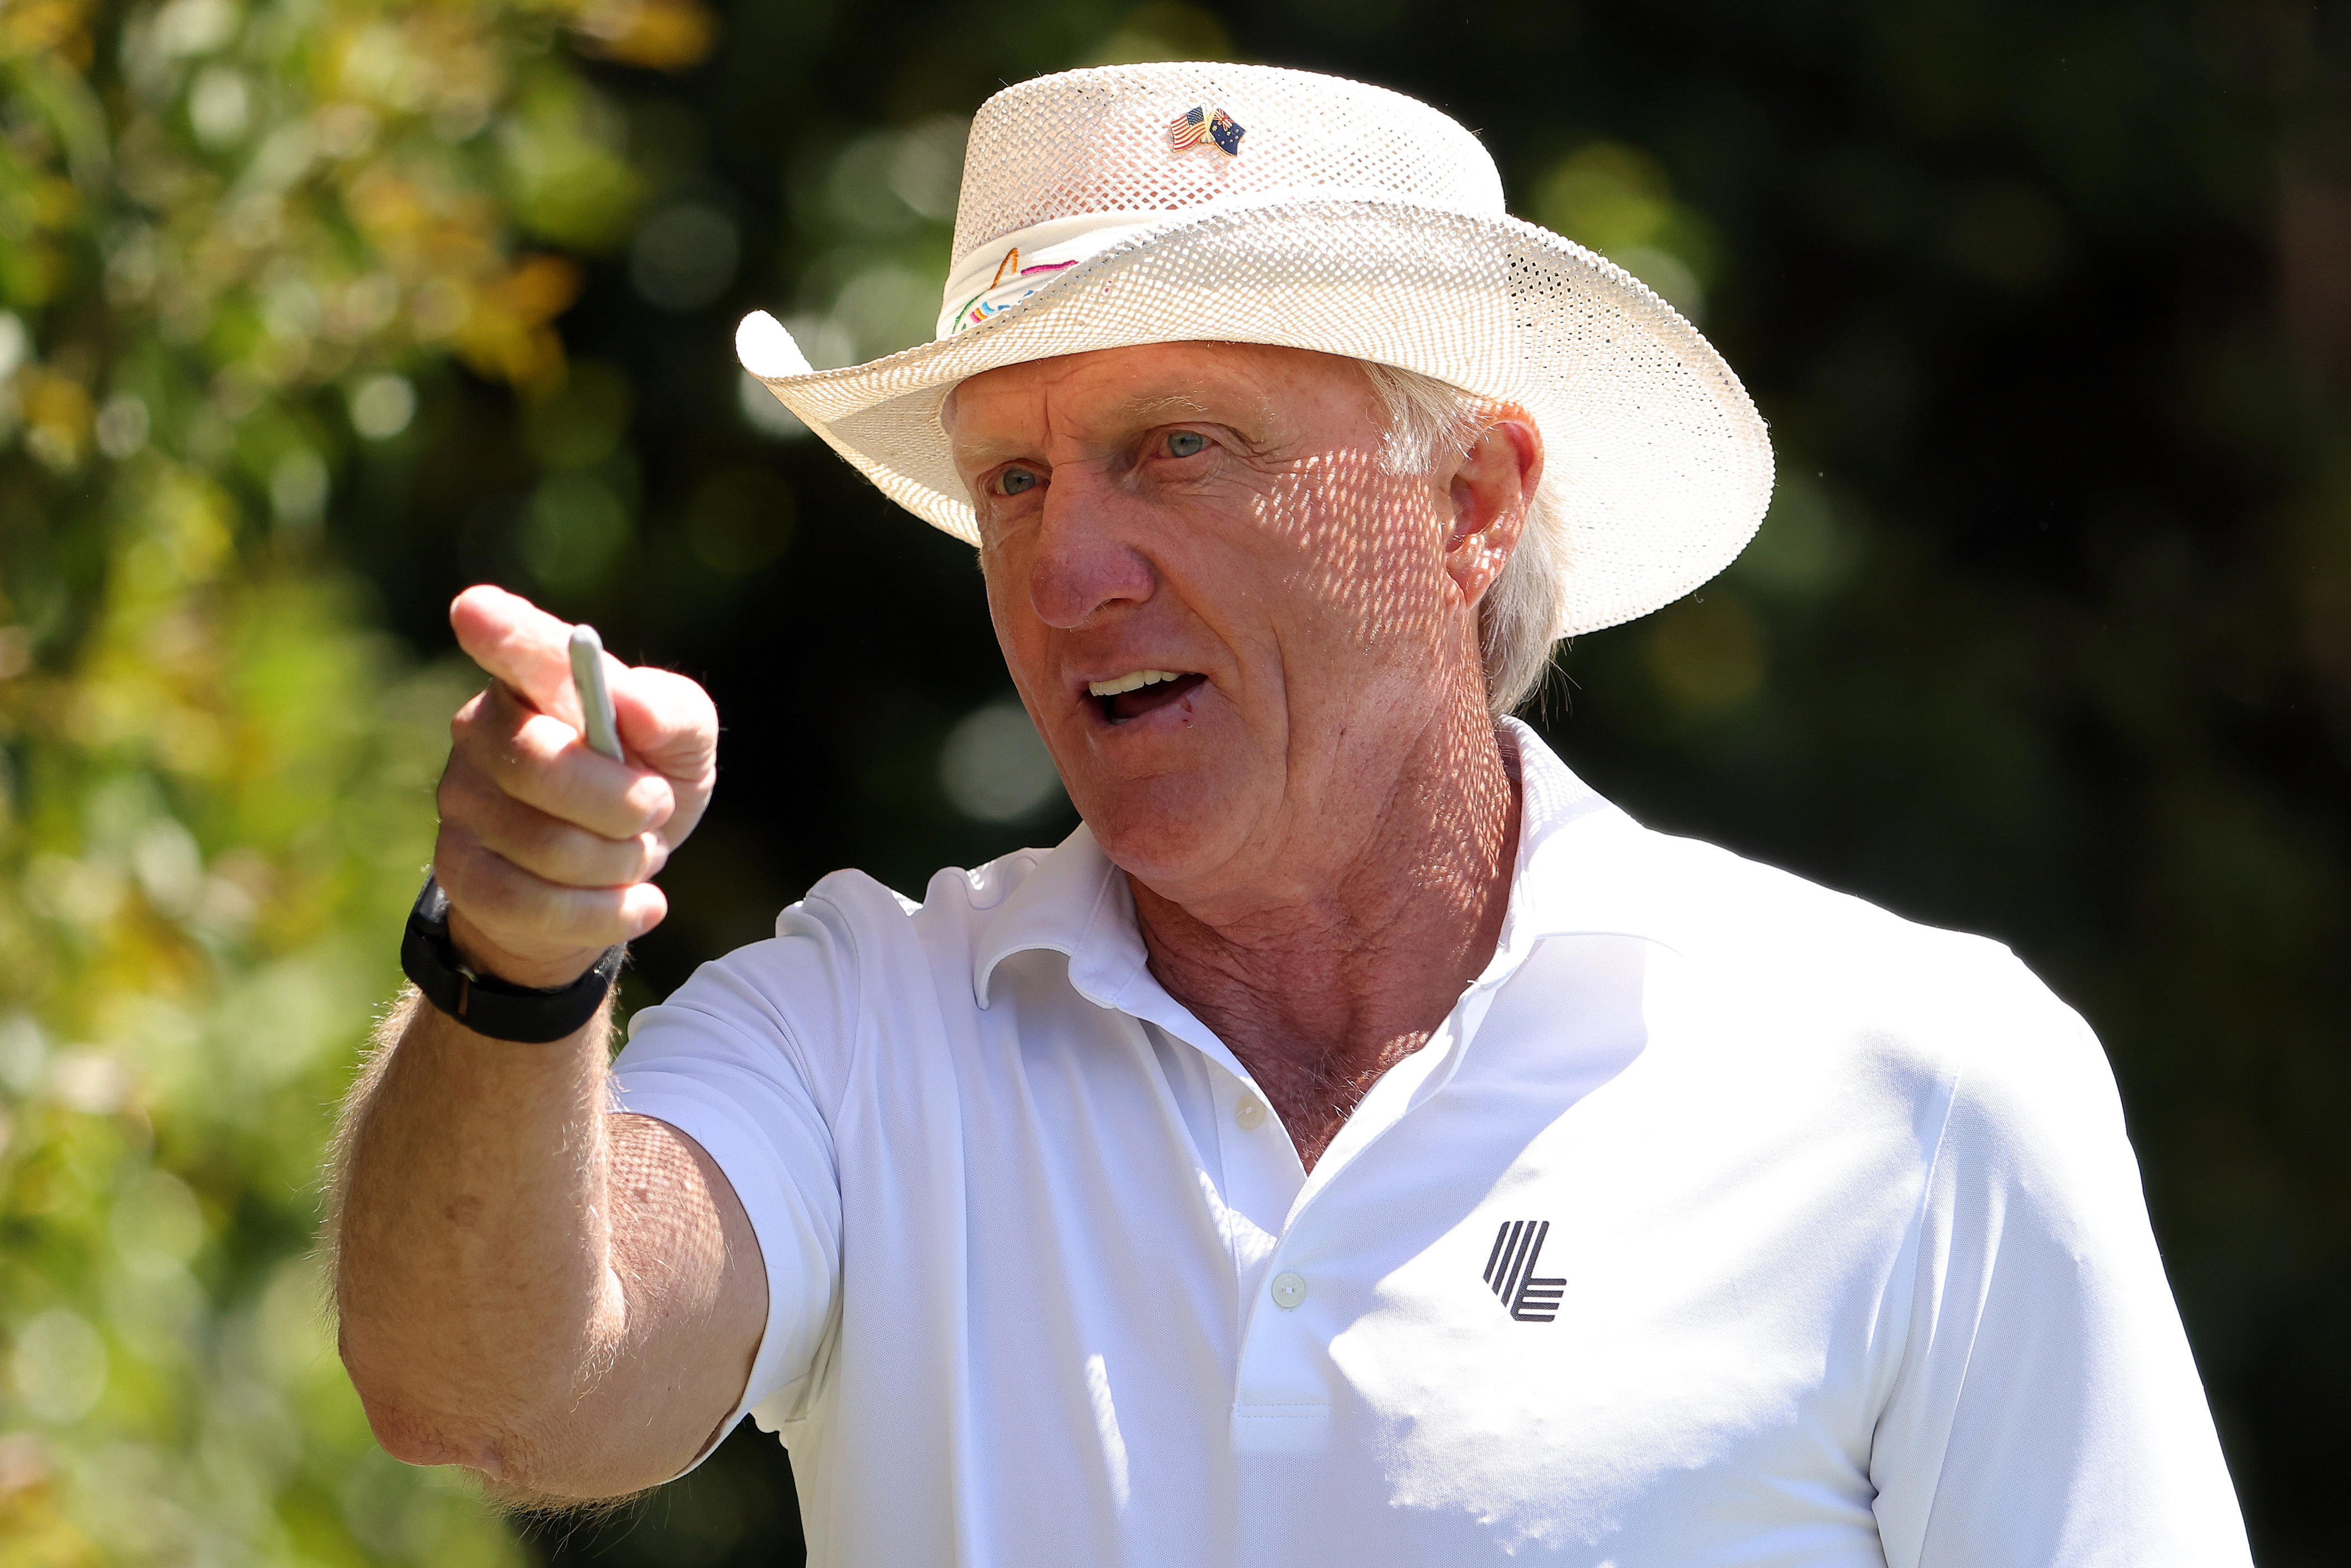 greg norman is haunting augusta national. here's what patrons thought of him at the masters